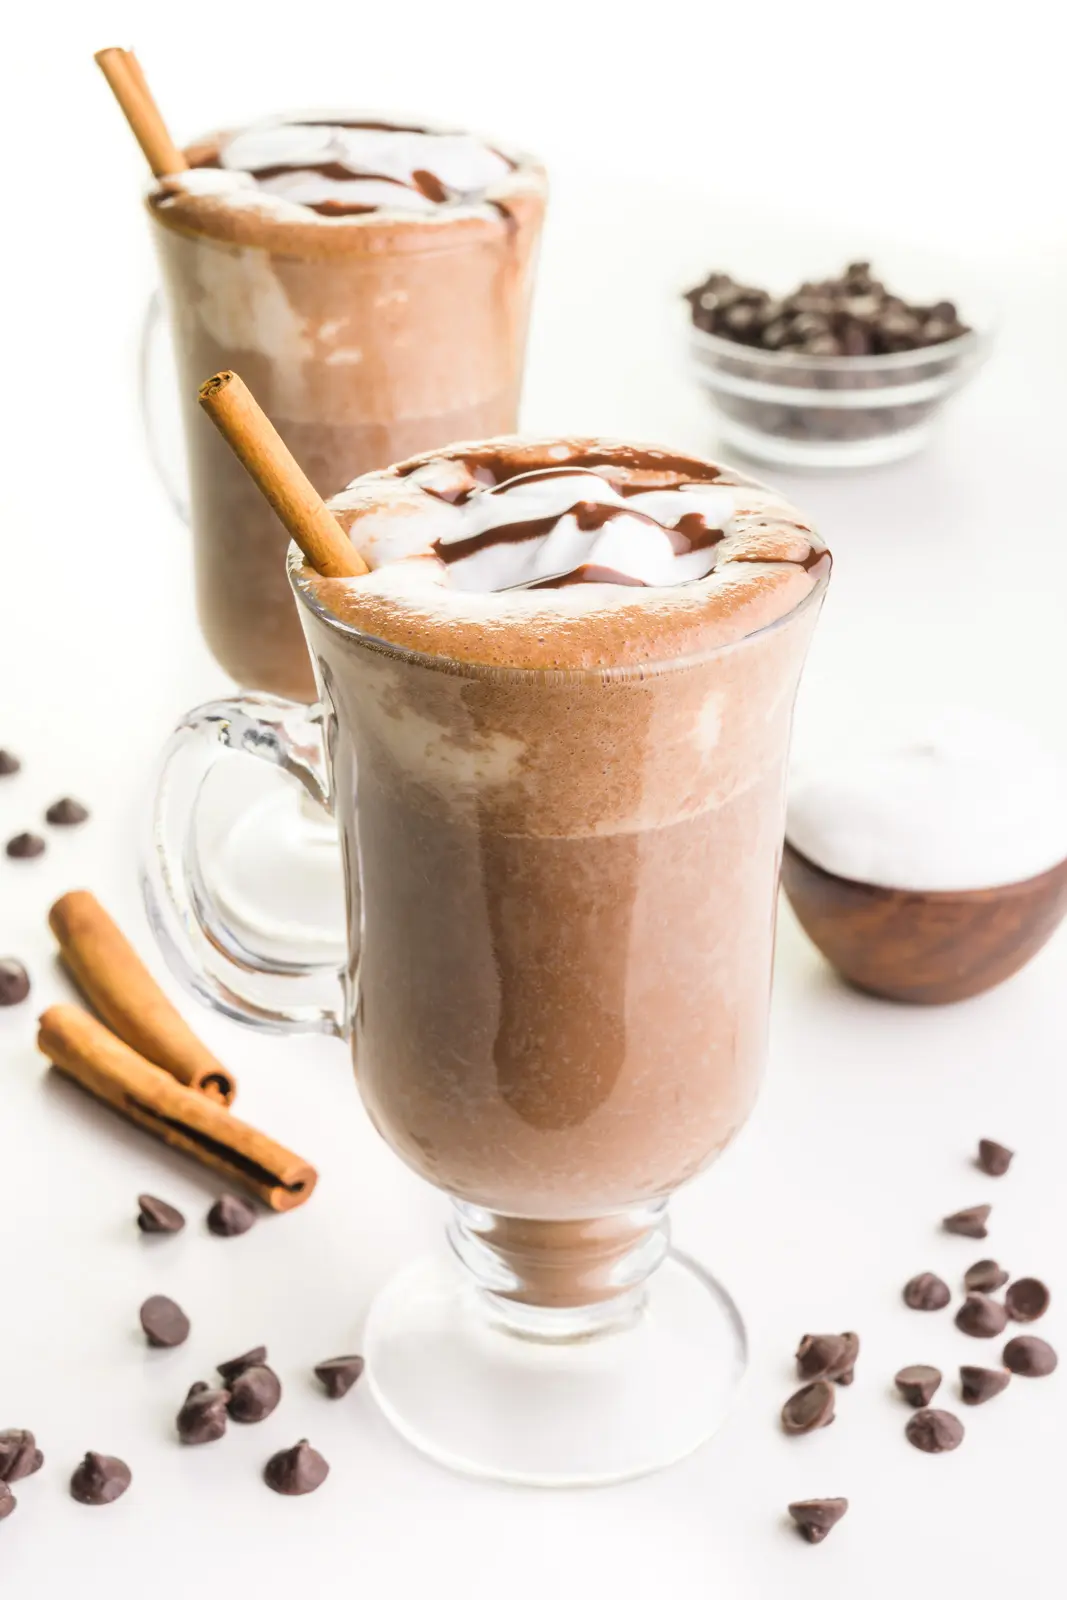 Two glass mugs hold vegan hot chocolate both with cream on top and cinnamon sticks. There are chocolate chips and cinnamon sticks around the mugs and a bowl of whipped cream and chocolate chips.